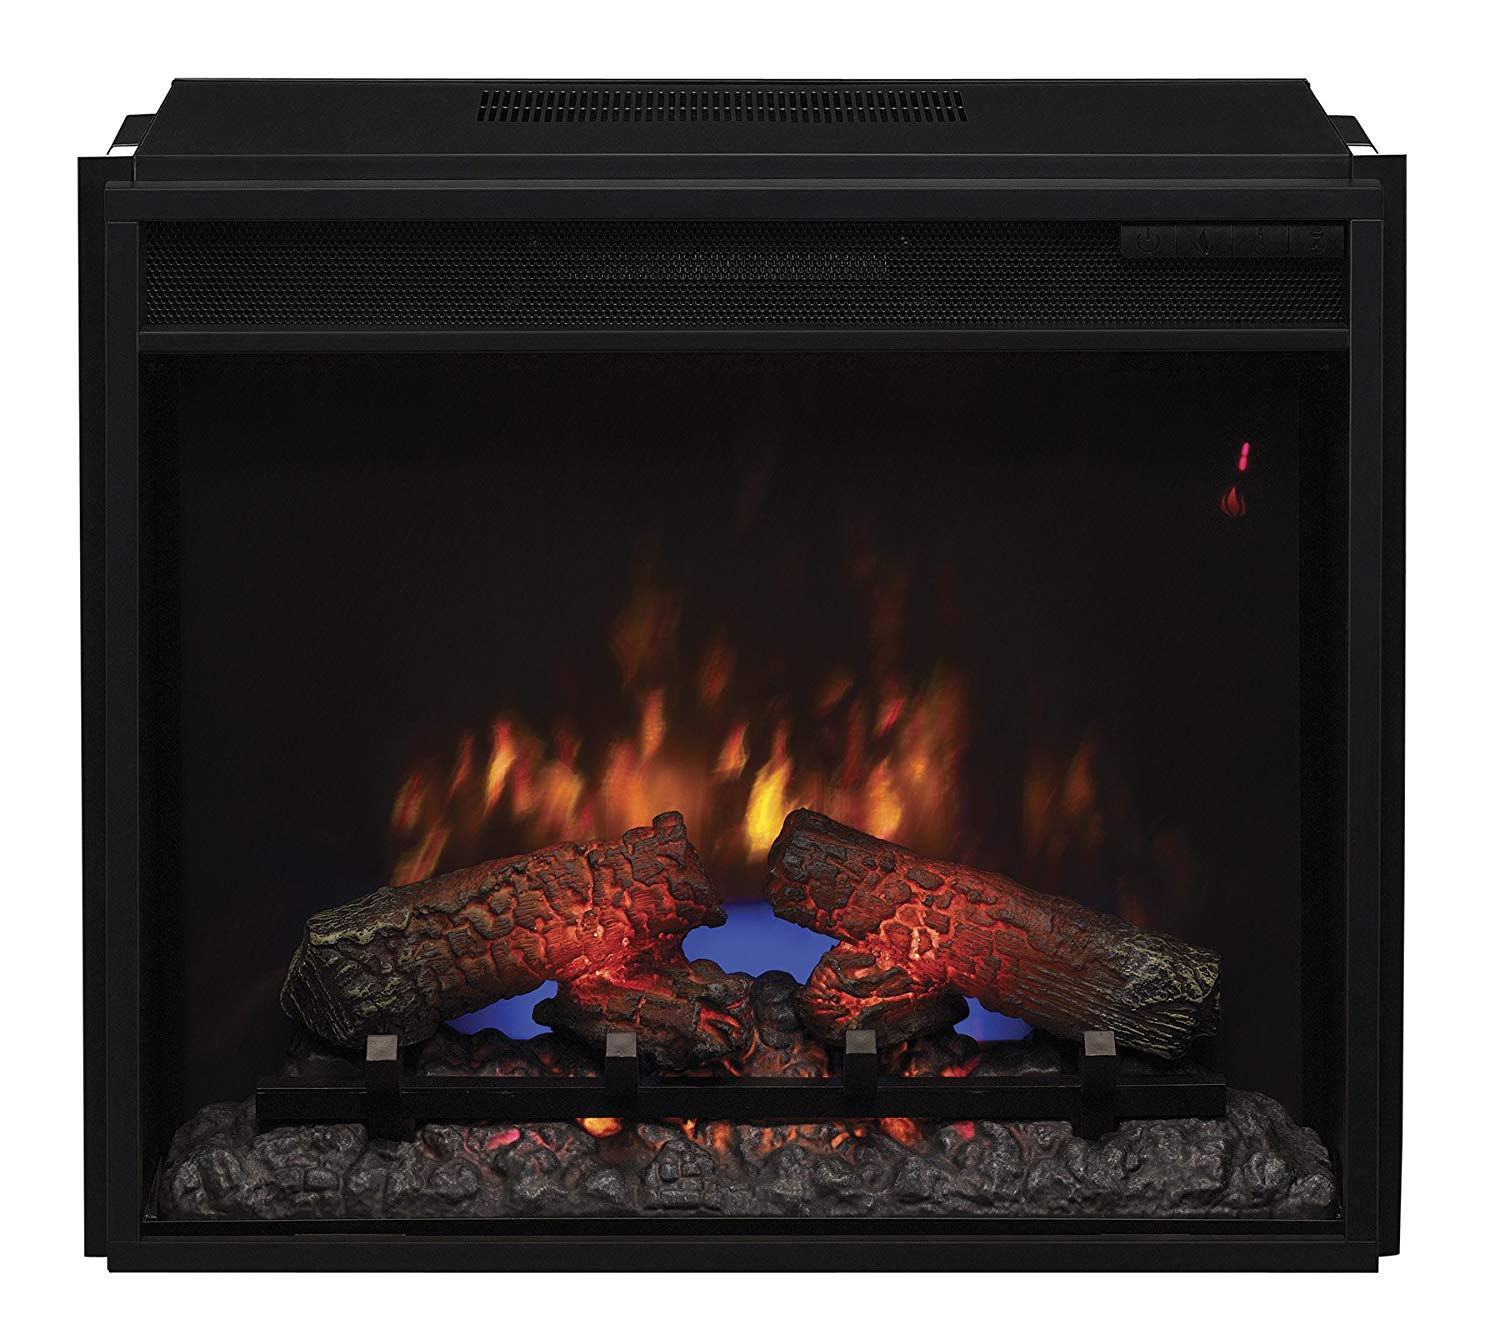 Gel Fuel Fireplace Insert Luxury Classicflame 23ef031grp 23" Electric Fireplace Insert with Safer Plug